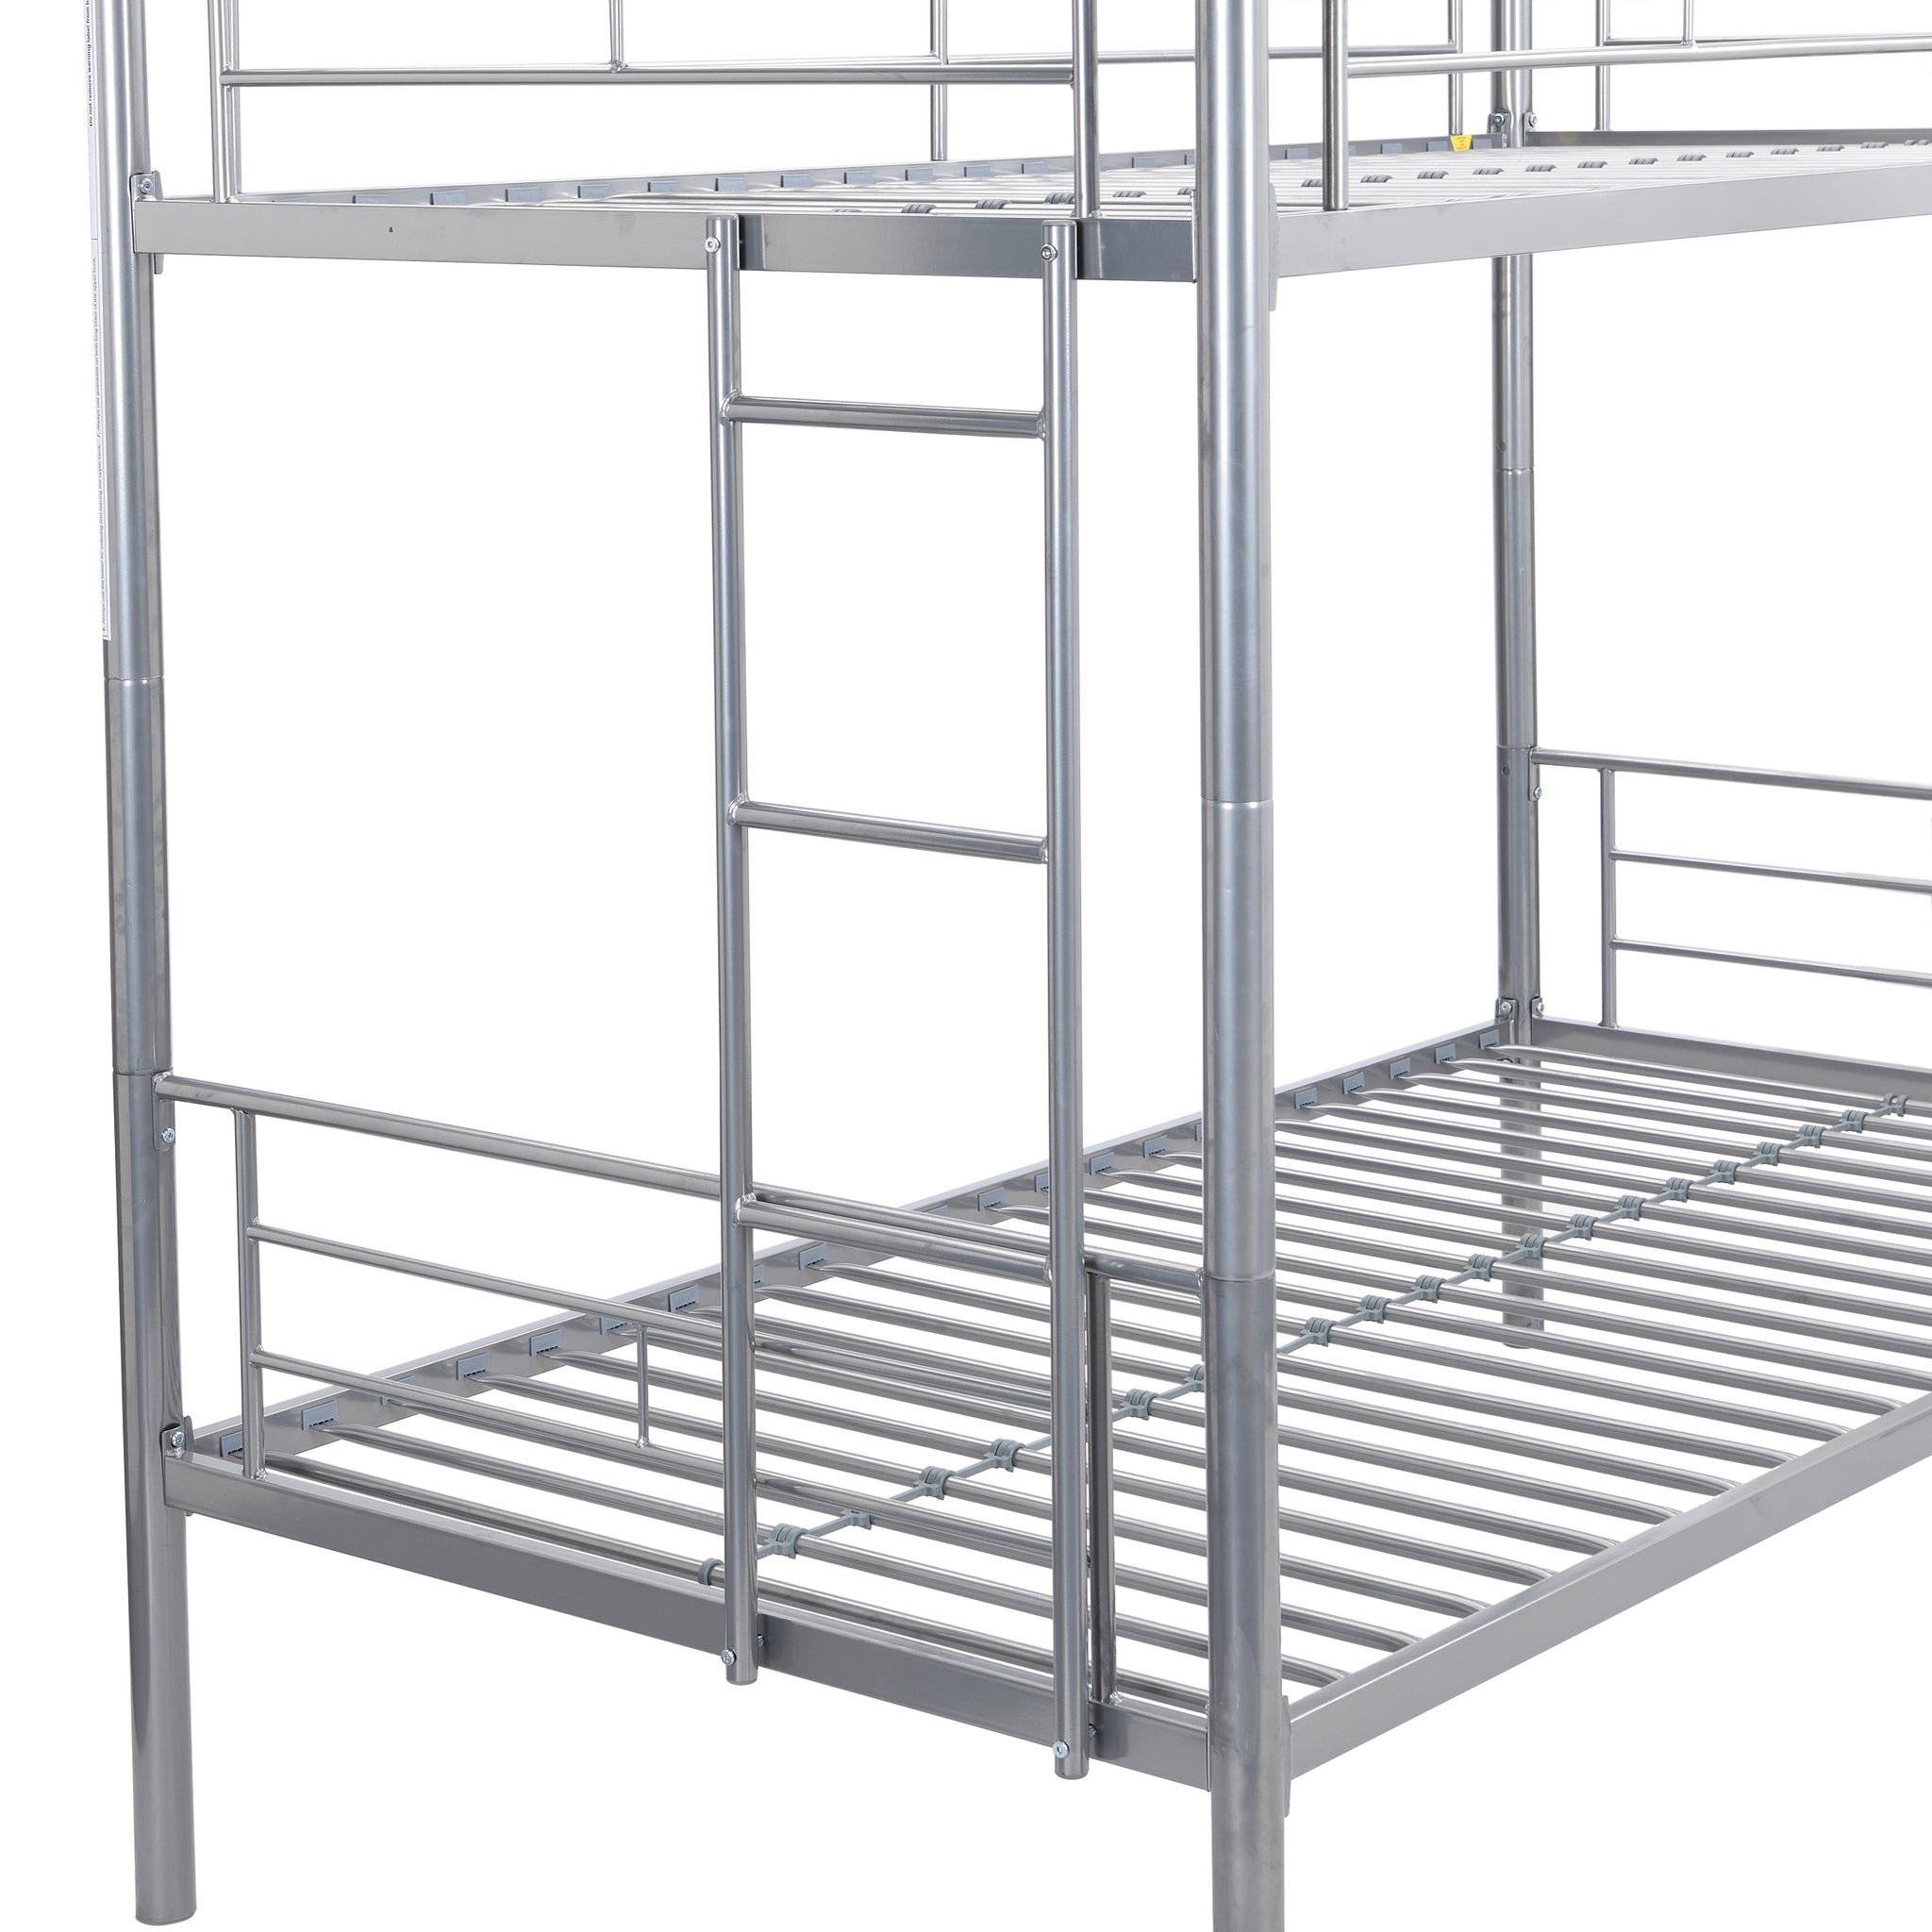 METAL BUNK BED WITH TRUNDLE SILVER silver-metal